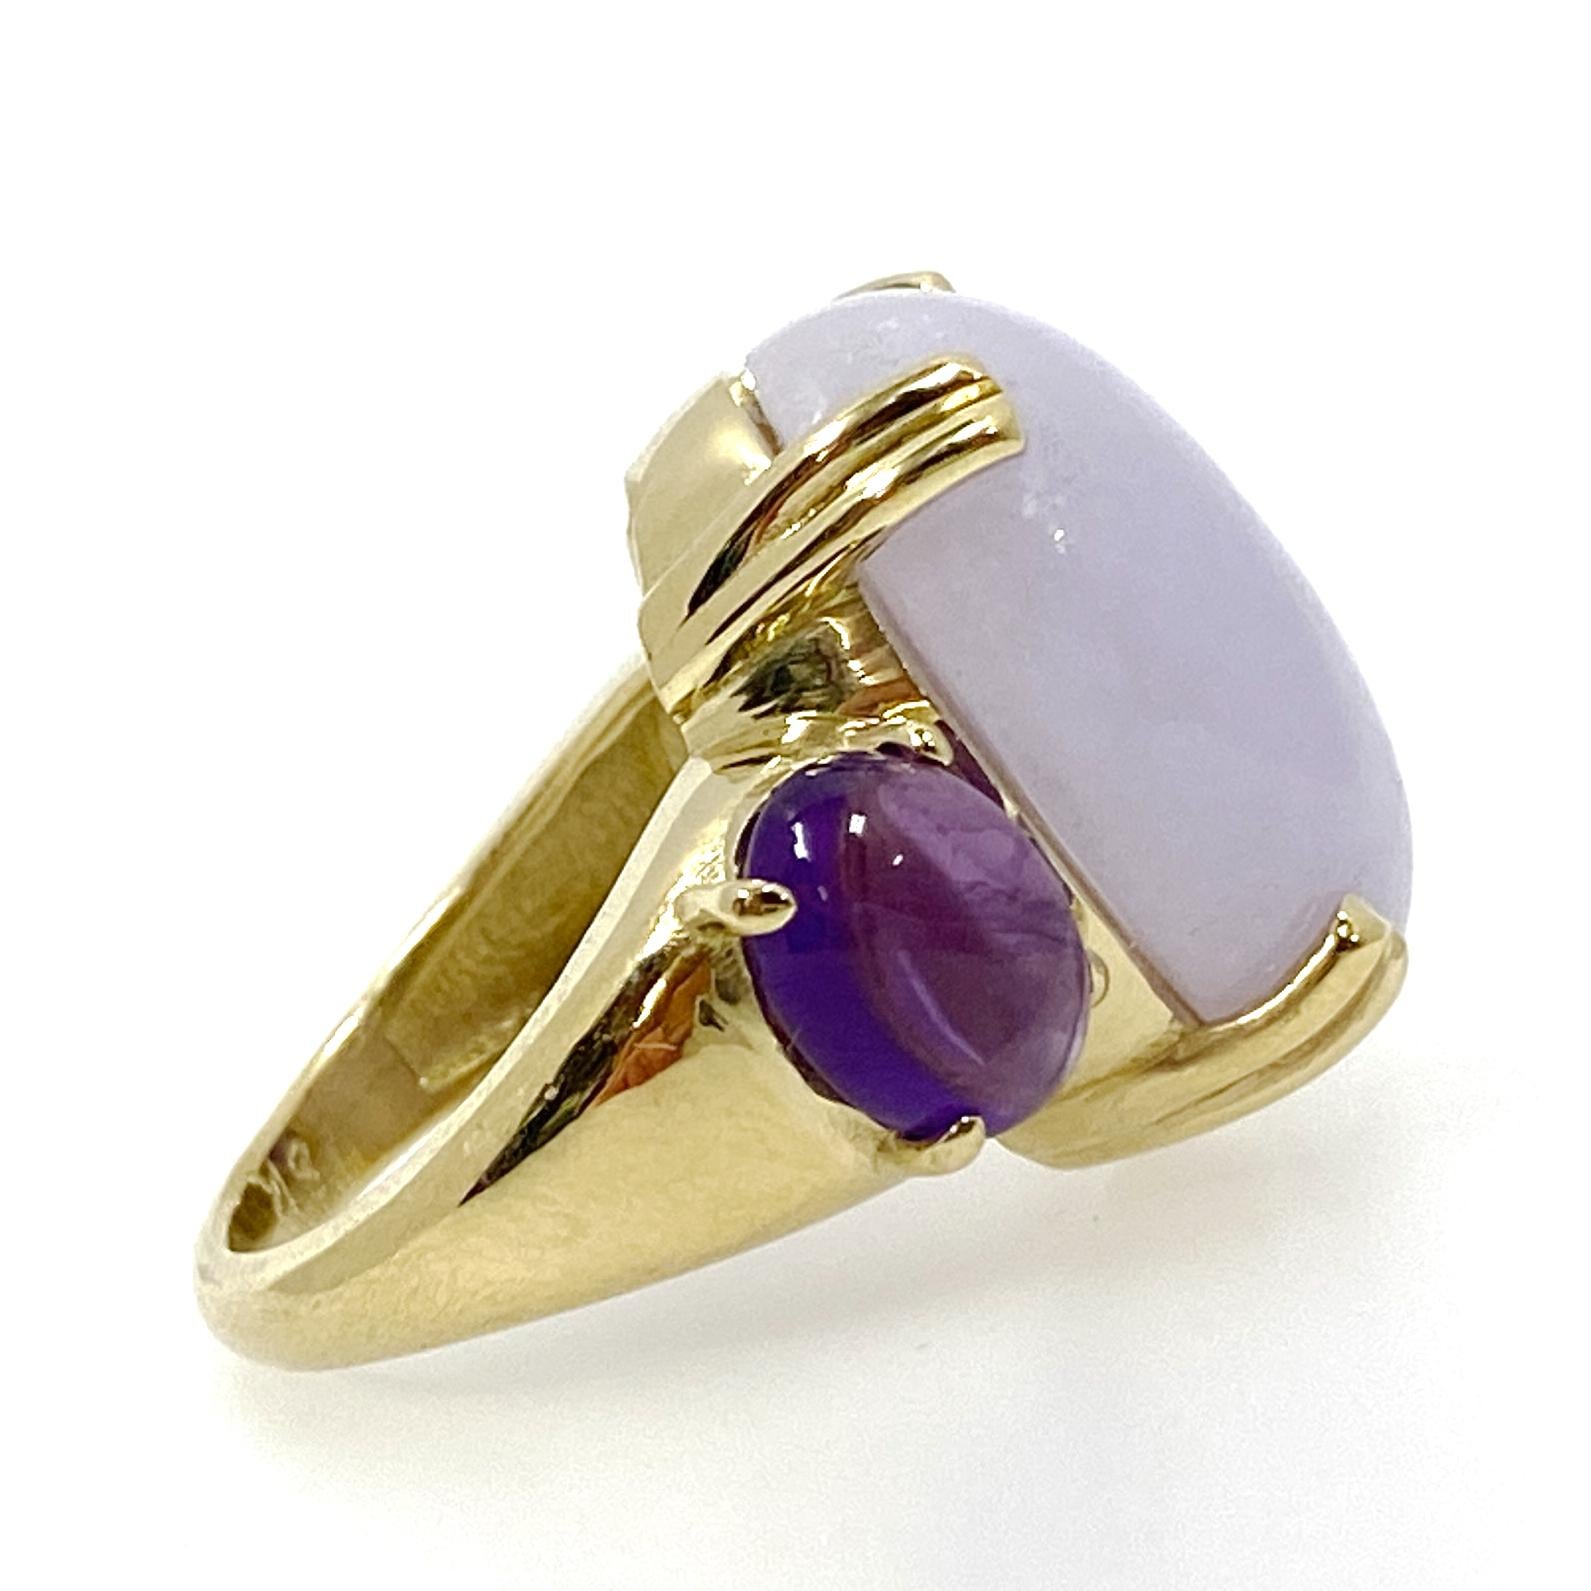 Eytan Brandes ensures a huge pale lavender jadeite cabochon is sitting pretty, centered between two dark purple amethysts in a bold and substantial high-polish 18 karat gold cocktail ring.

The natural, undyed jade cabochon is set with prominent